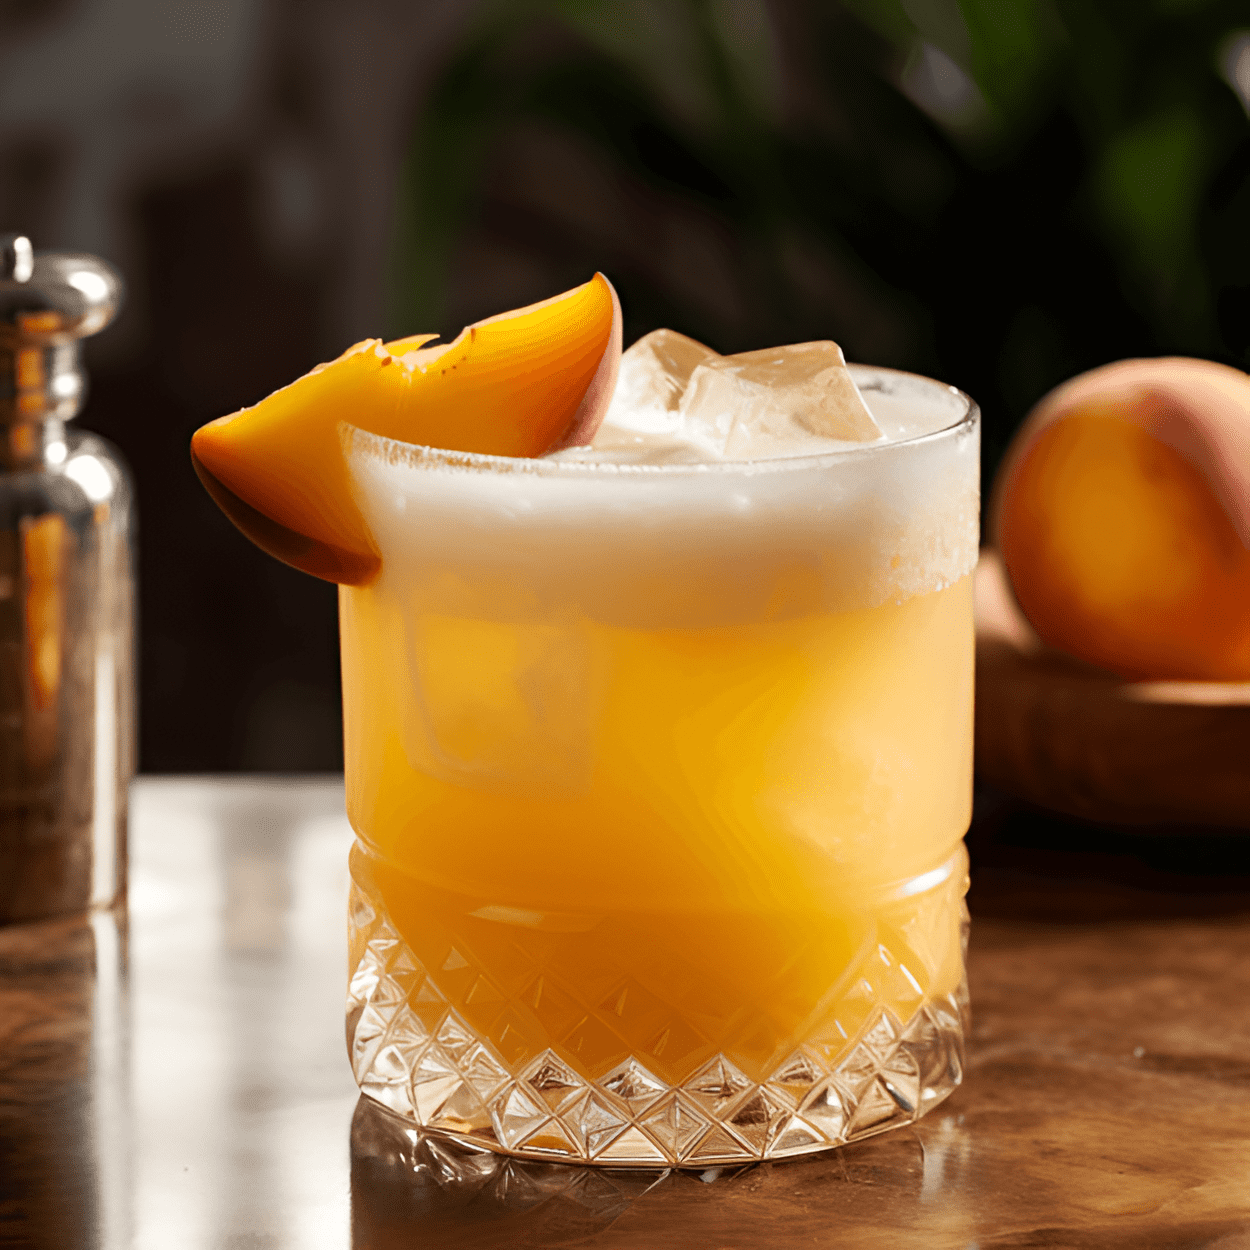 Ginger-peach Piña Colada Cocktail Recipe - The Ginger-peach Piña Colada is sweet, creamy, and fruity, with a hint of spice from the ginger. The peach adds a juicy, sweet note, while the coconut and pineapple give it that classic tropical flavor. The rum adds a warm, boozy kick.